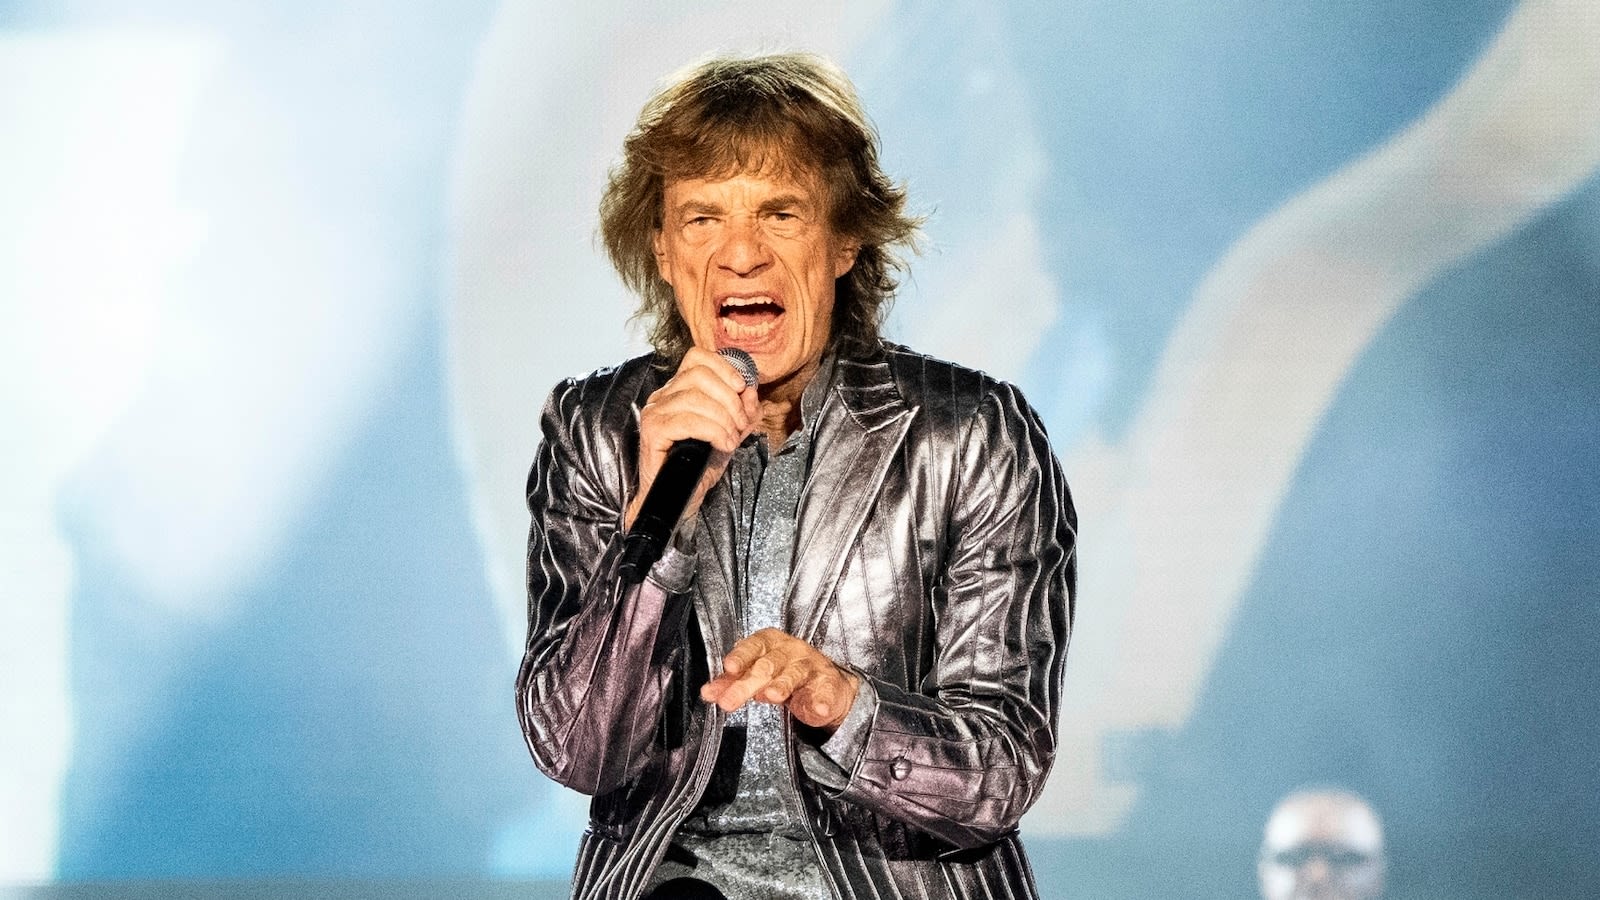 Mick Jagger visits Johnson Space Center as Rolling Stones kick off nationwide tour